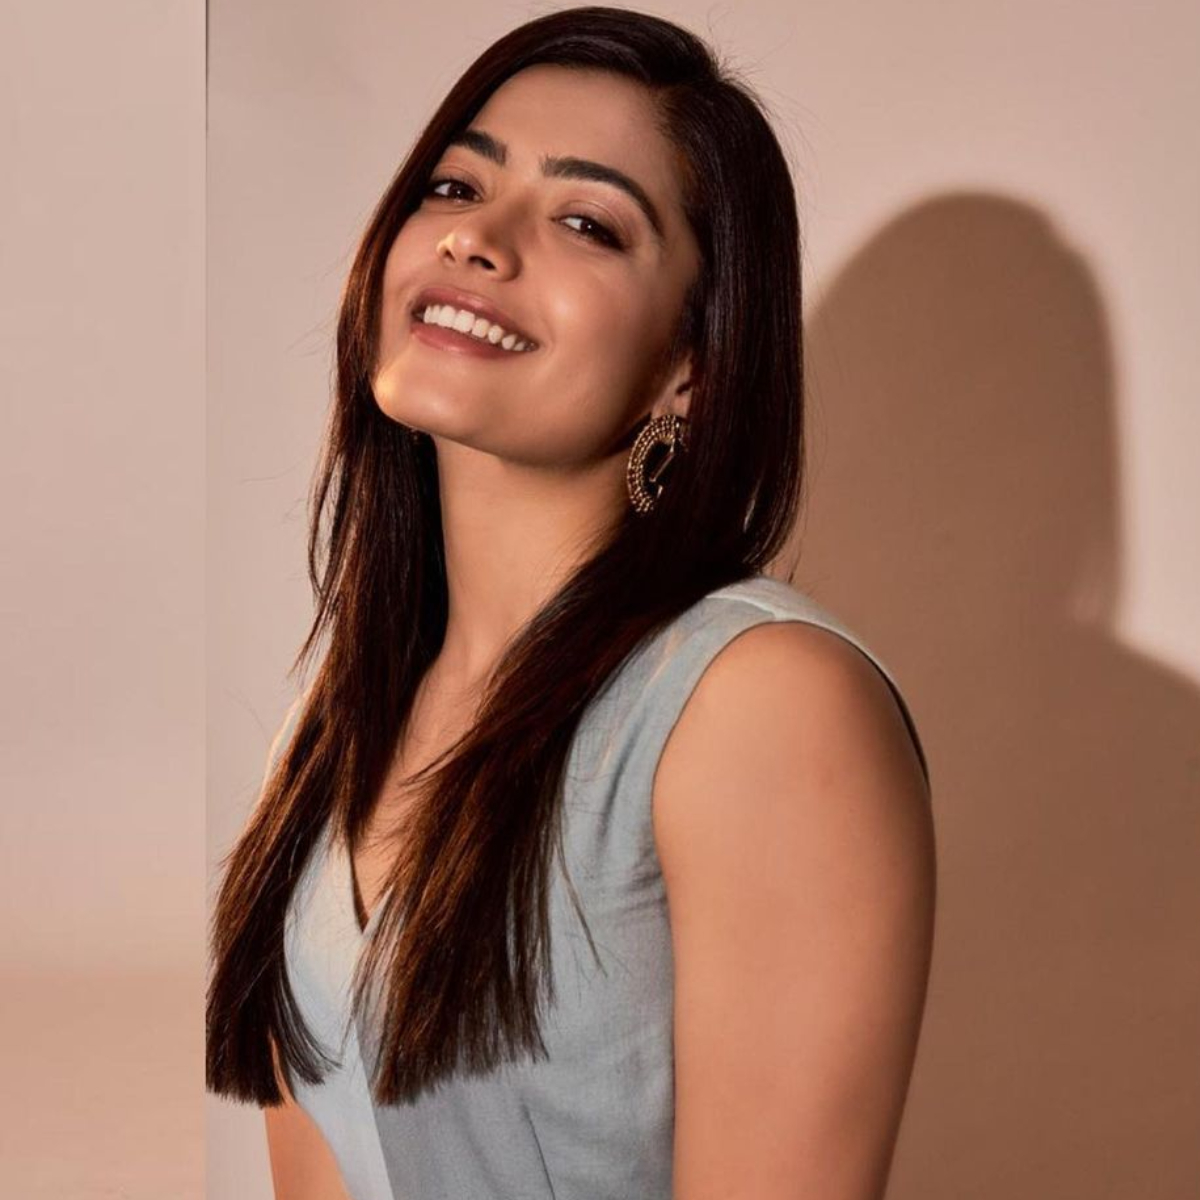 EXCLUSIVE: Rashmika Mandanna: People don't want to see things which are made up, I am real on social media